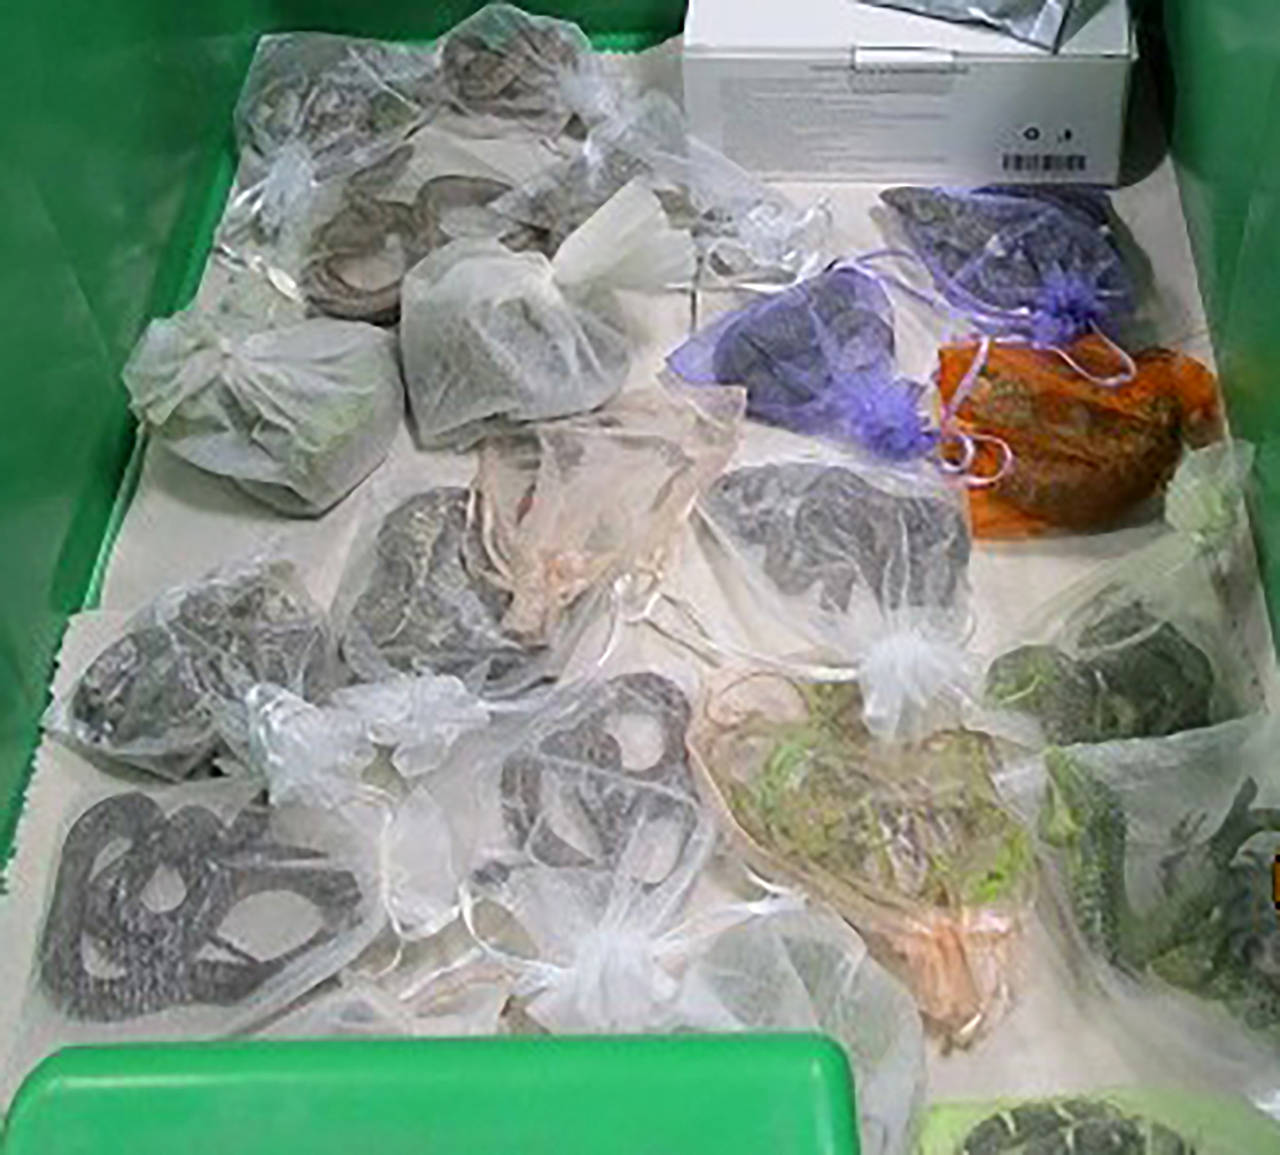 This February 2022 photo provided by the U.S. Customs and Border Protection shows snakes in bags fo...